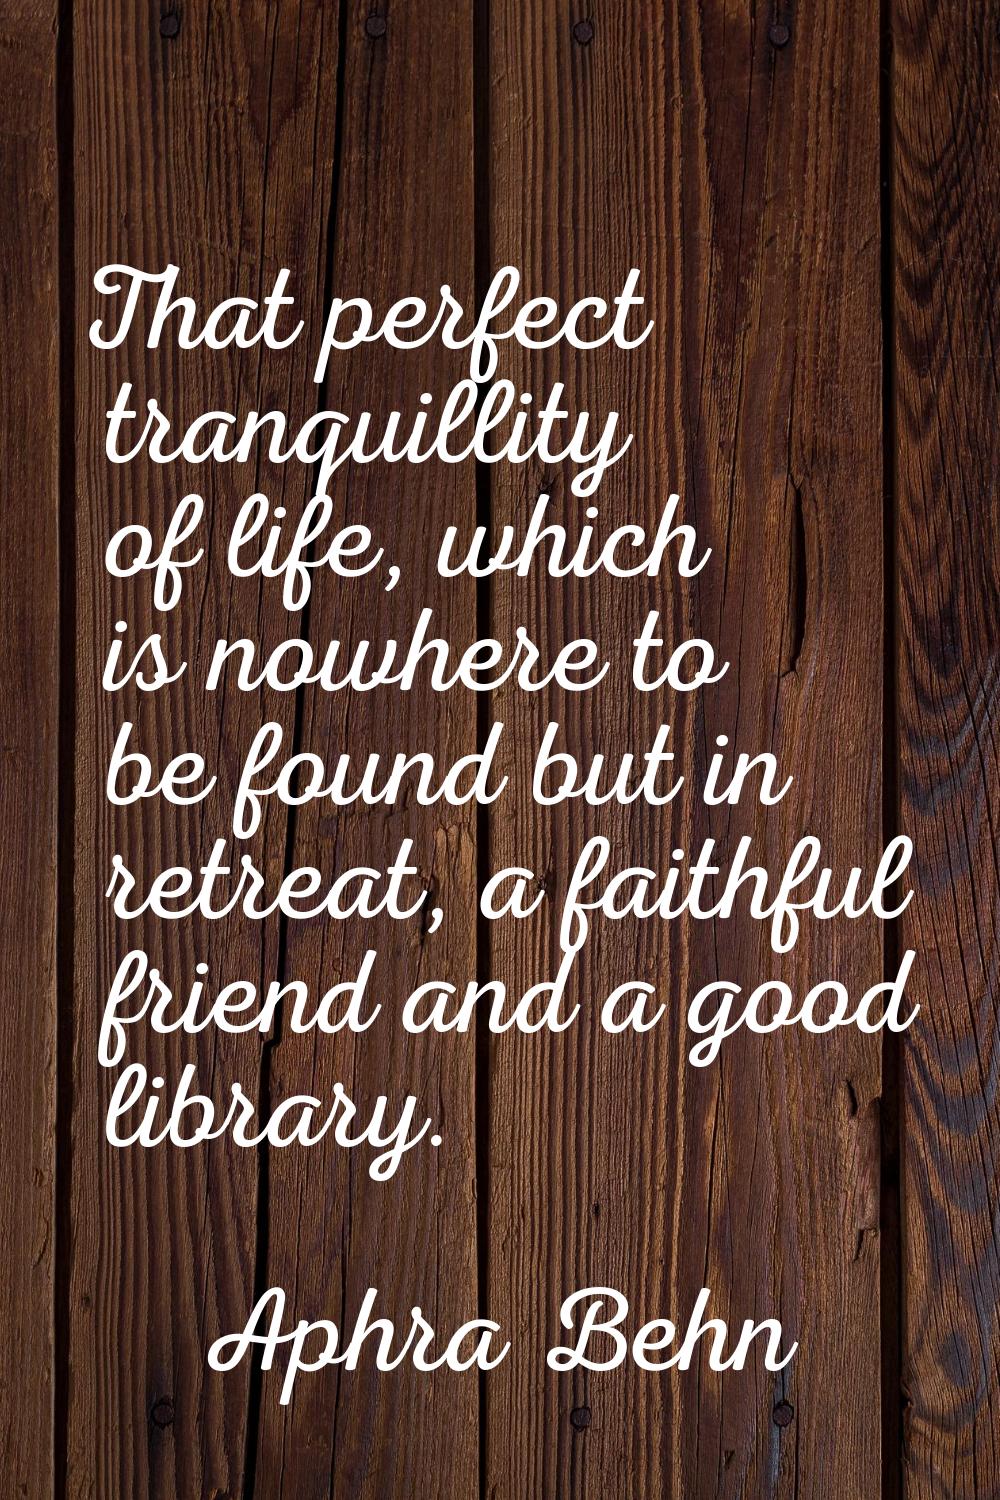 That perfect tranquillity of life, which is nowhere to be found but in retreat, a faithful friend a